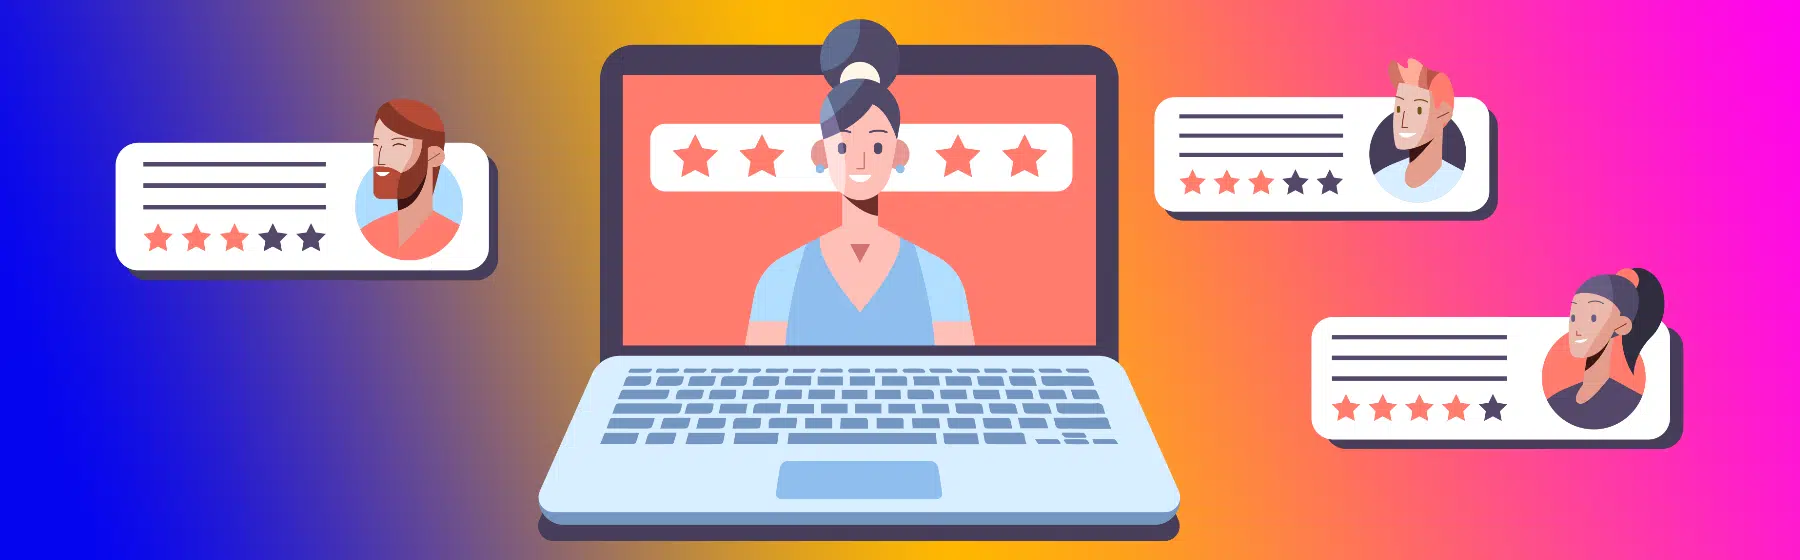 users reviews with rating stars showing on laptop screen